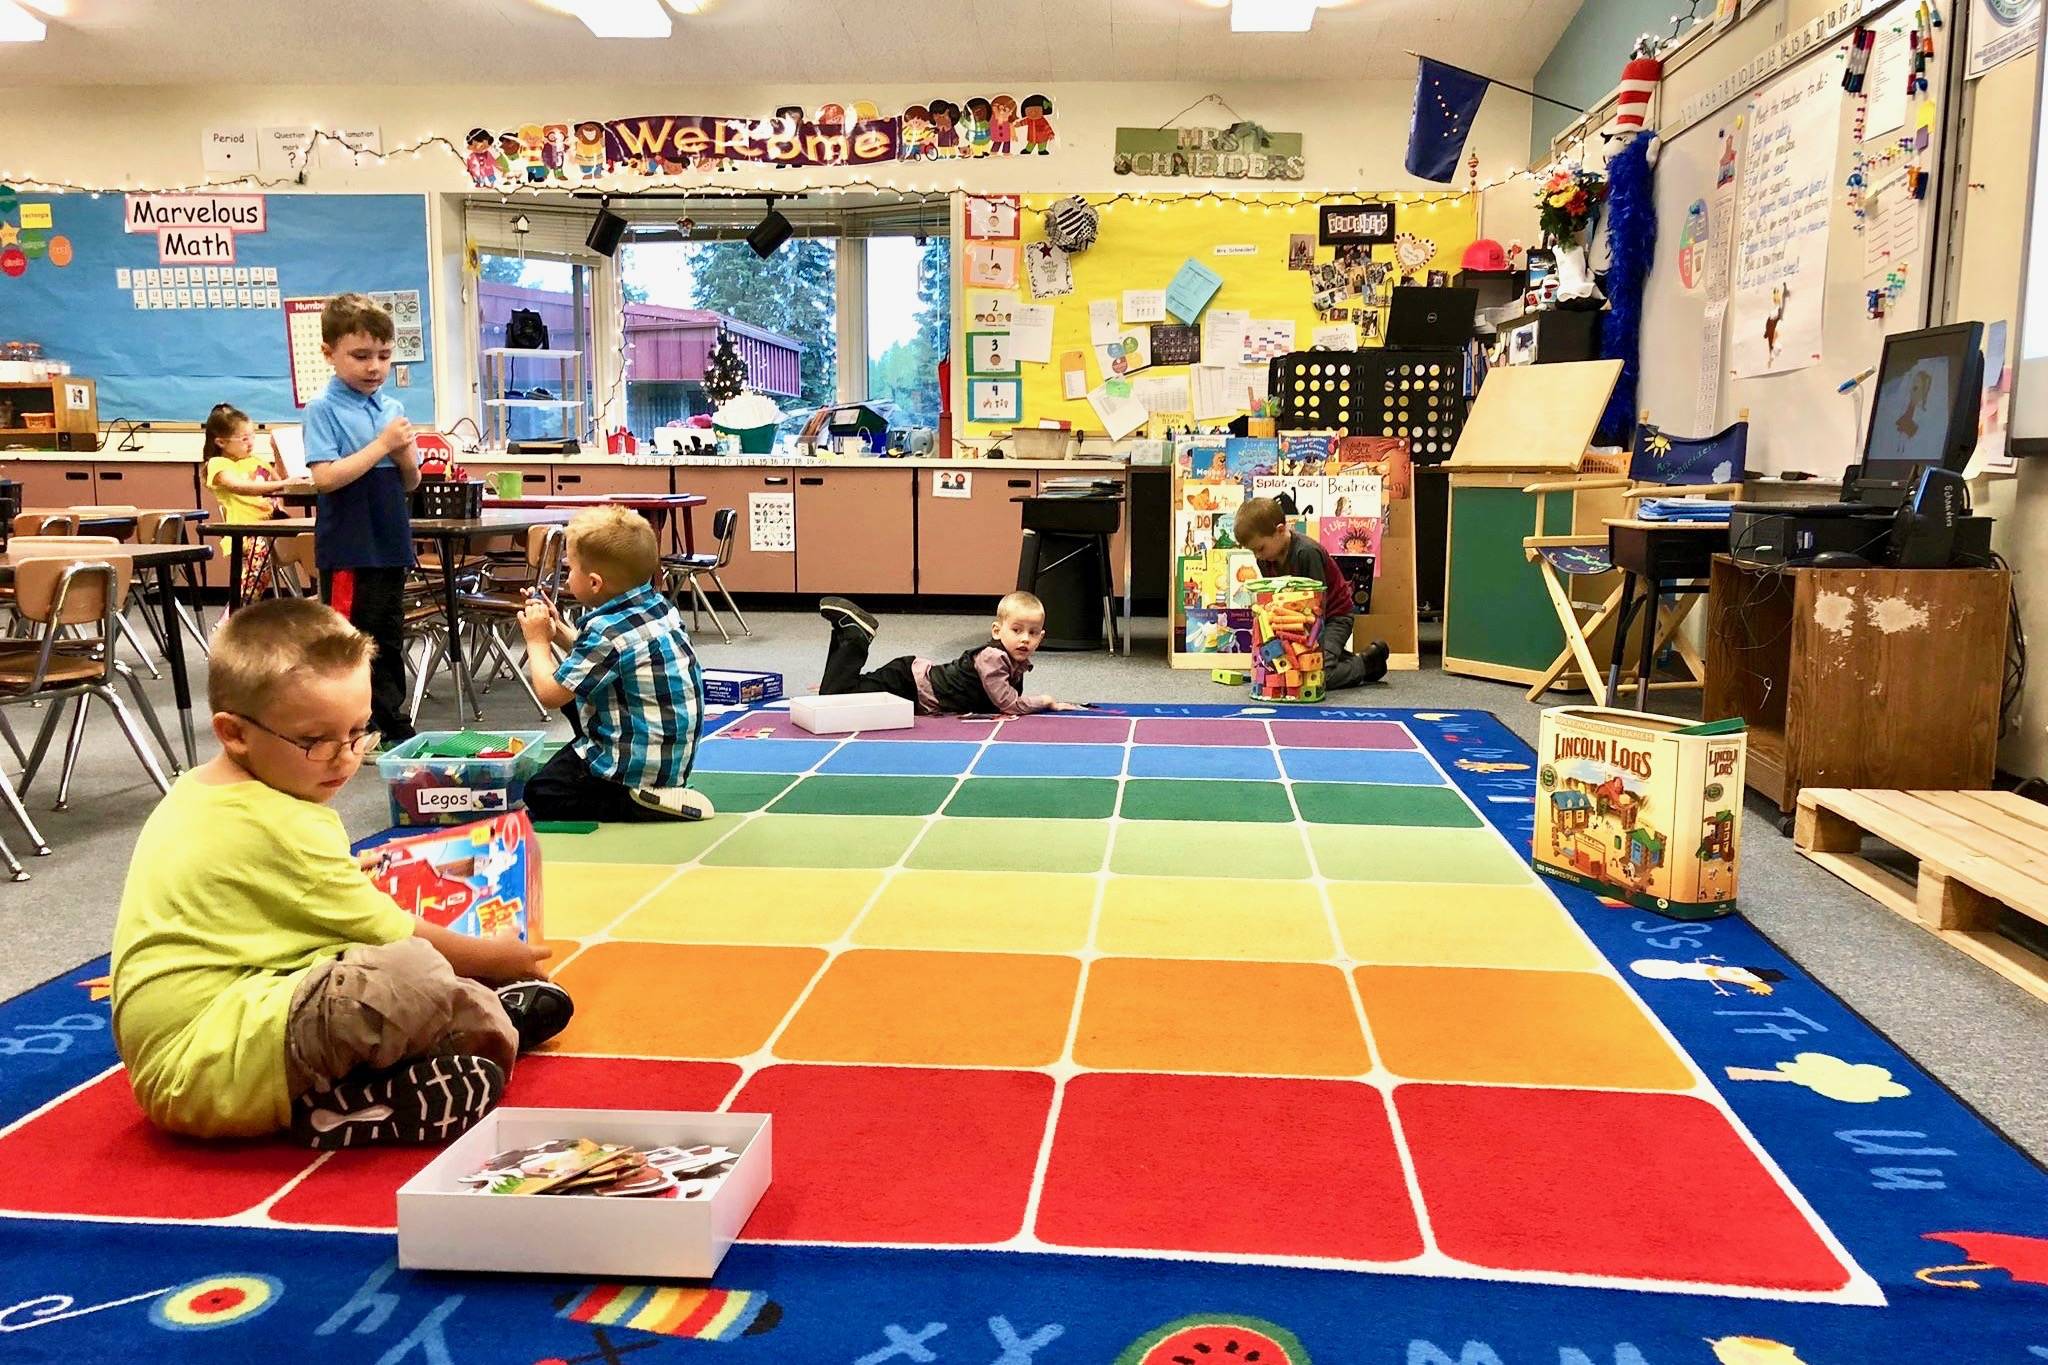 Elementary students get comfortable in their new classrooms on the first day of school, Tuesday, Aug. 21, 2018, at Mountain View Elementary in Kenai, Alaska. (Photo by Victoria Petersen/Peninsula Clarion)